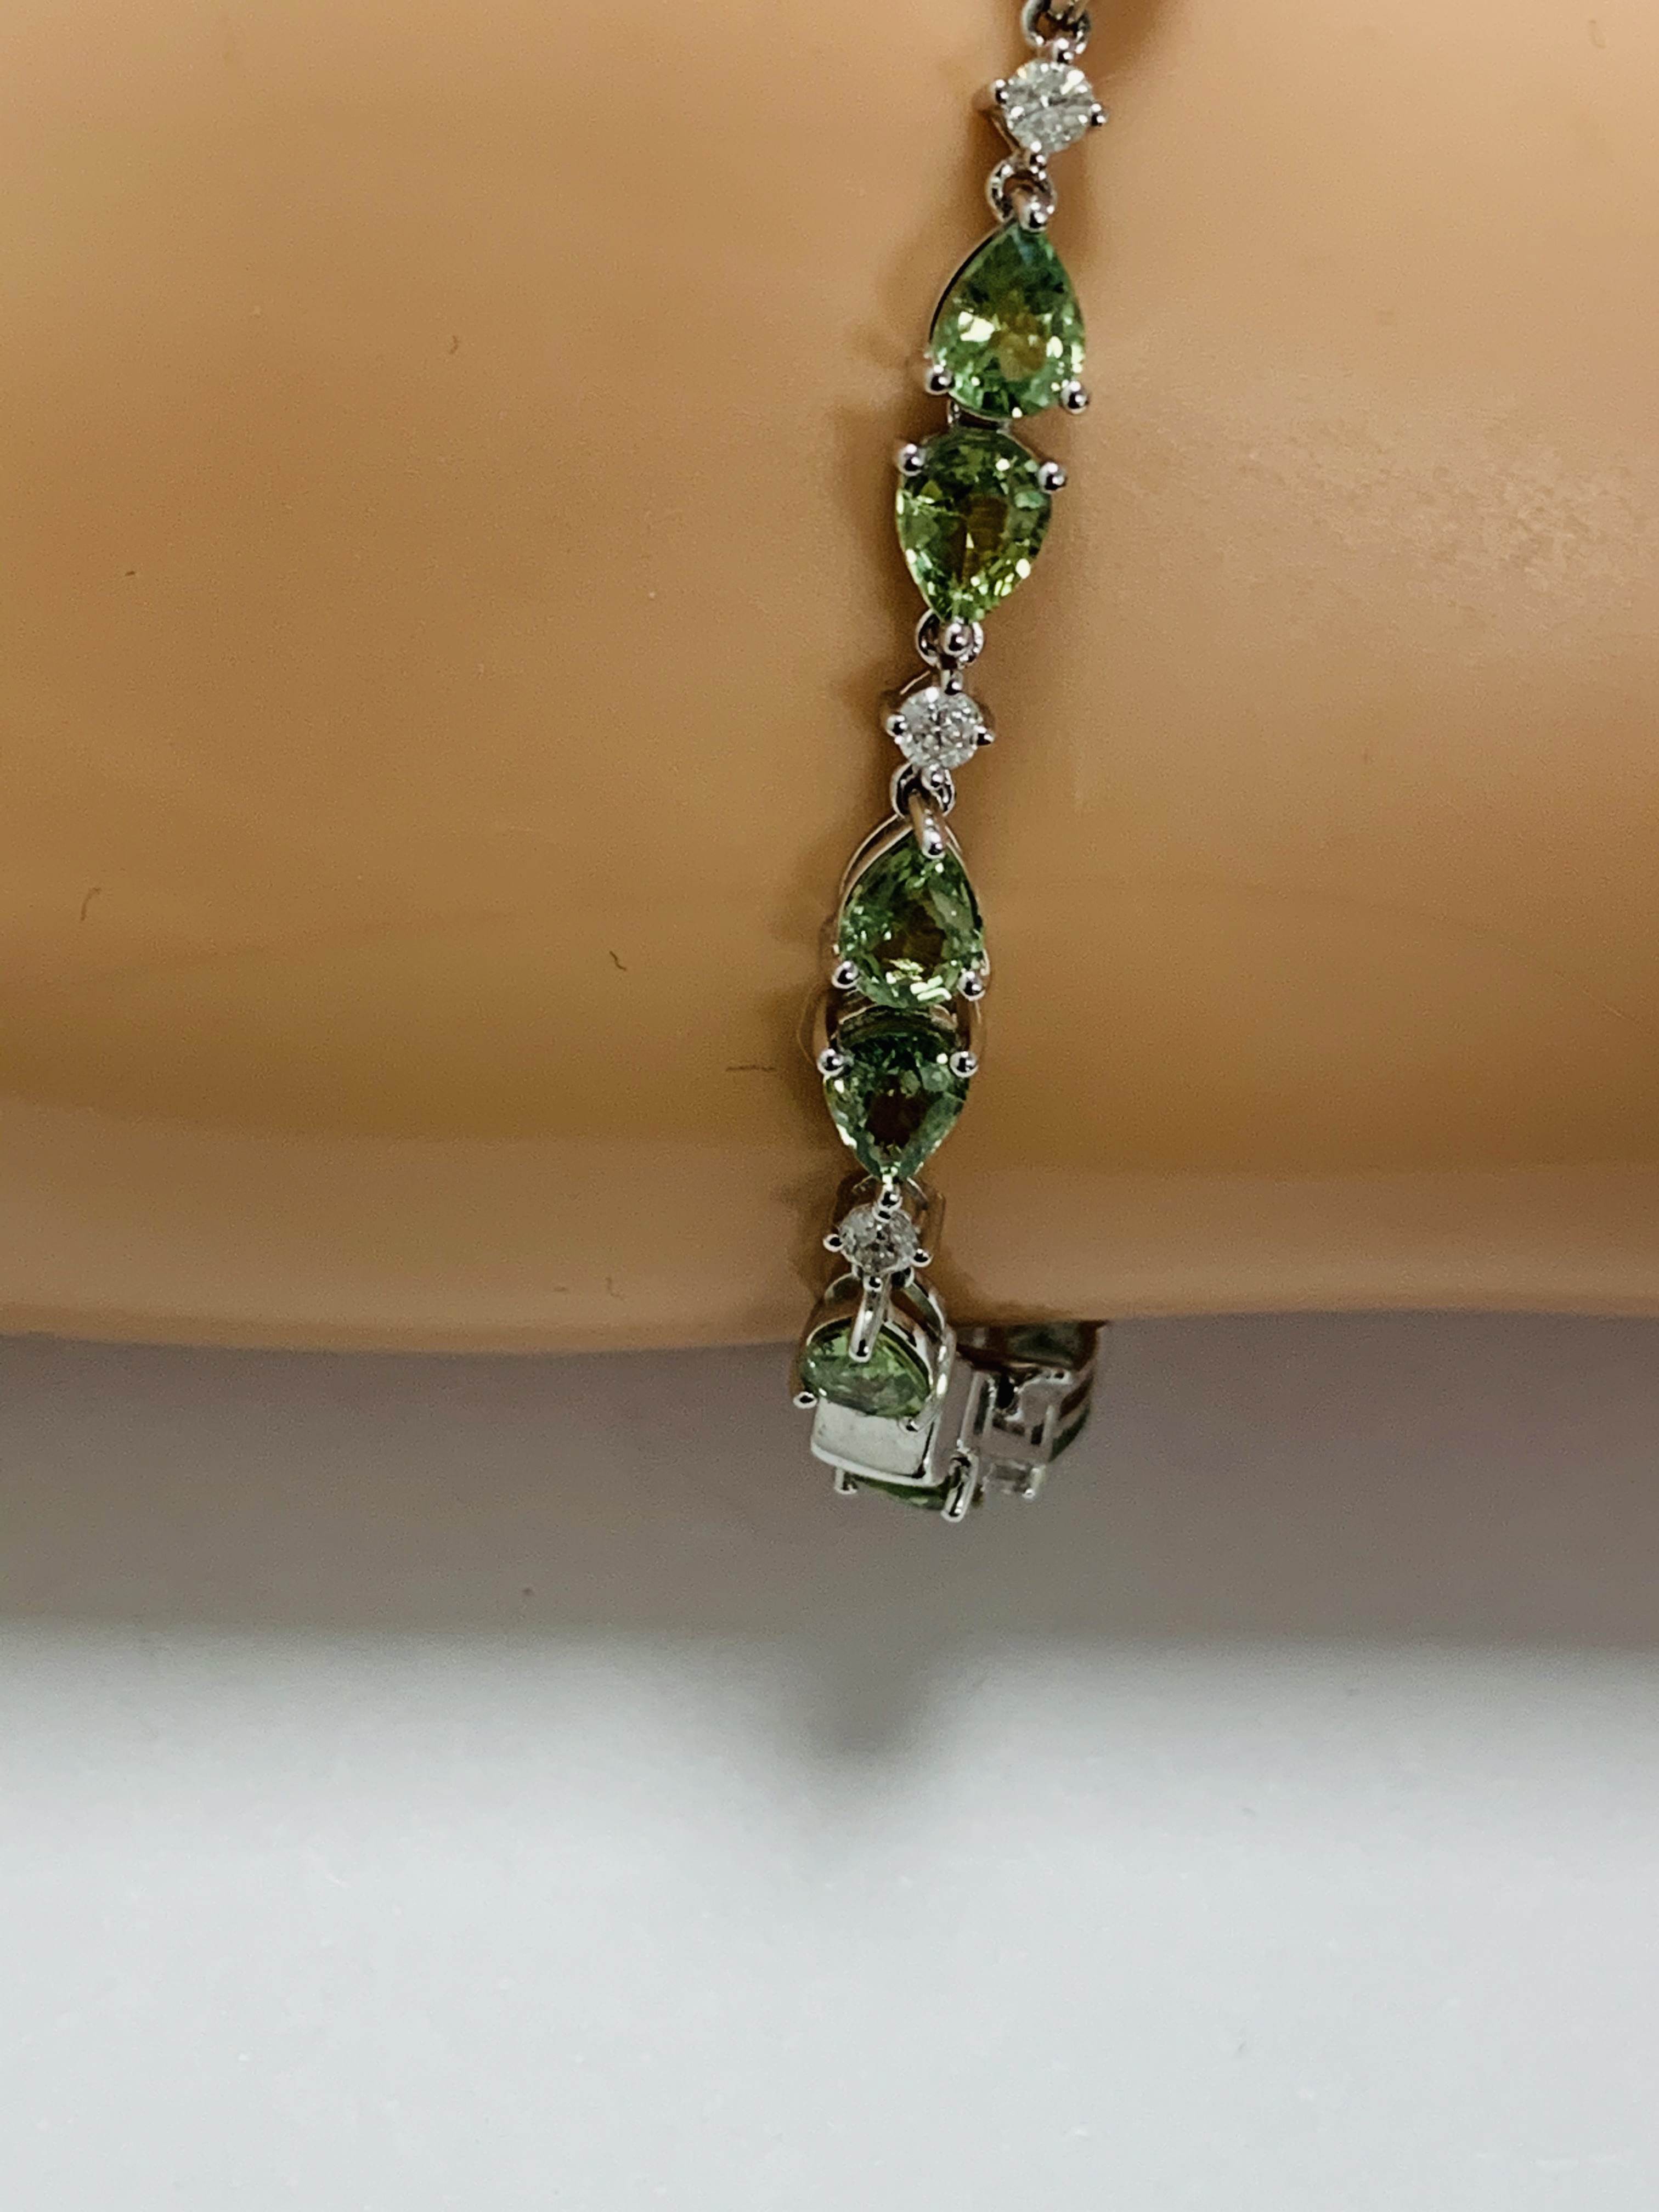 14ct White Gold Sapphire and Diamond bracelet featuring, 22 pear cut, light green Sapphires (9.05ct - Image 9 of 12